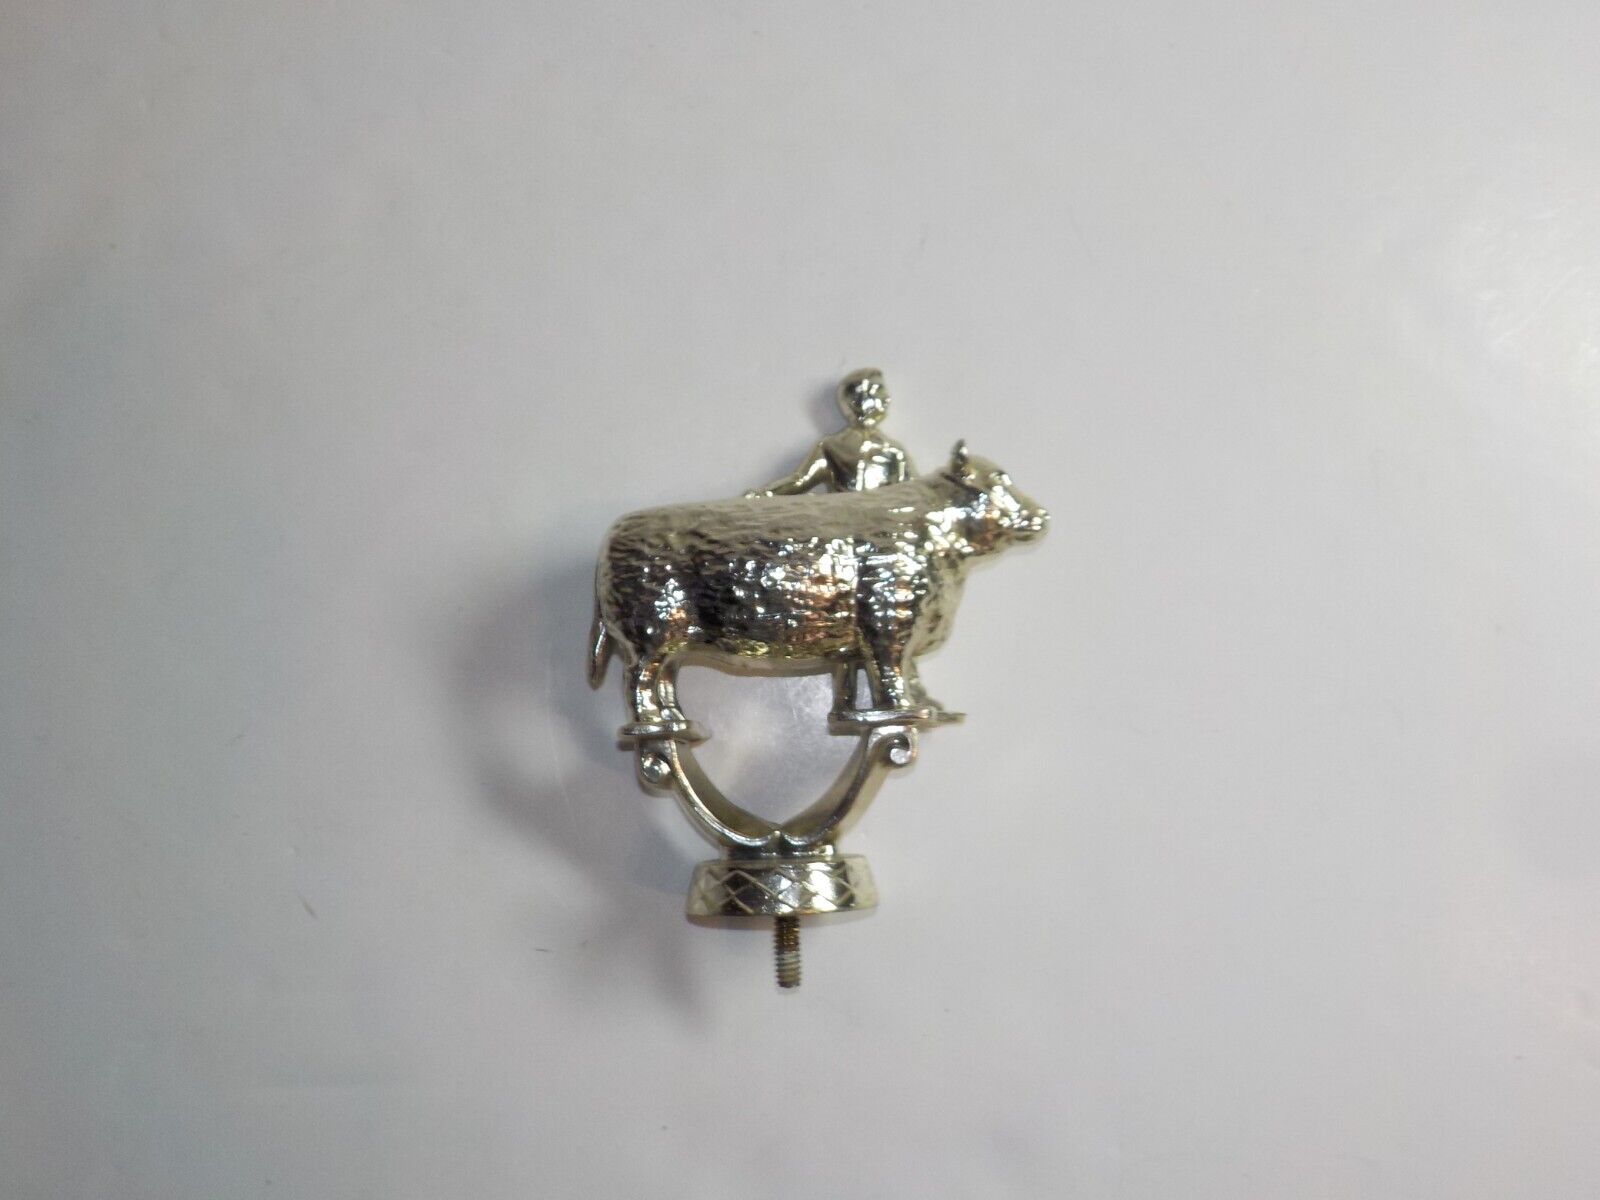 1960s-70s HEAVY METAL SILVER TONED COW TROPHY TOPPER Cattle Show